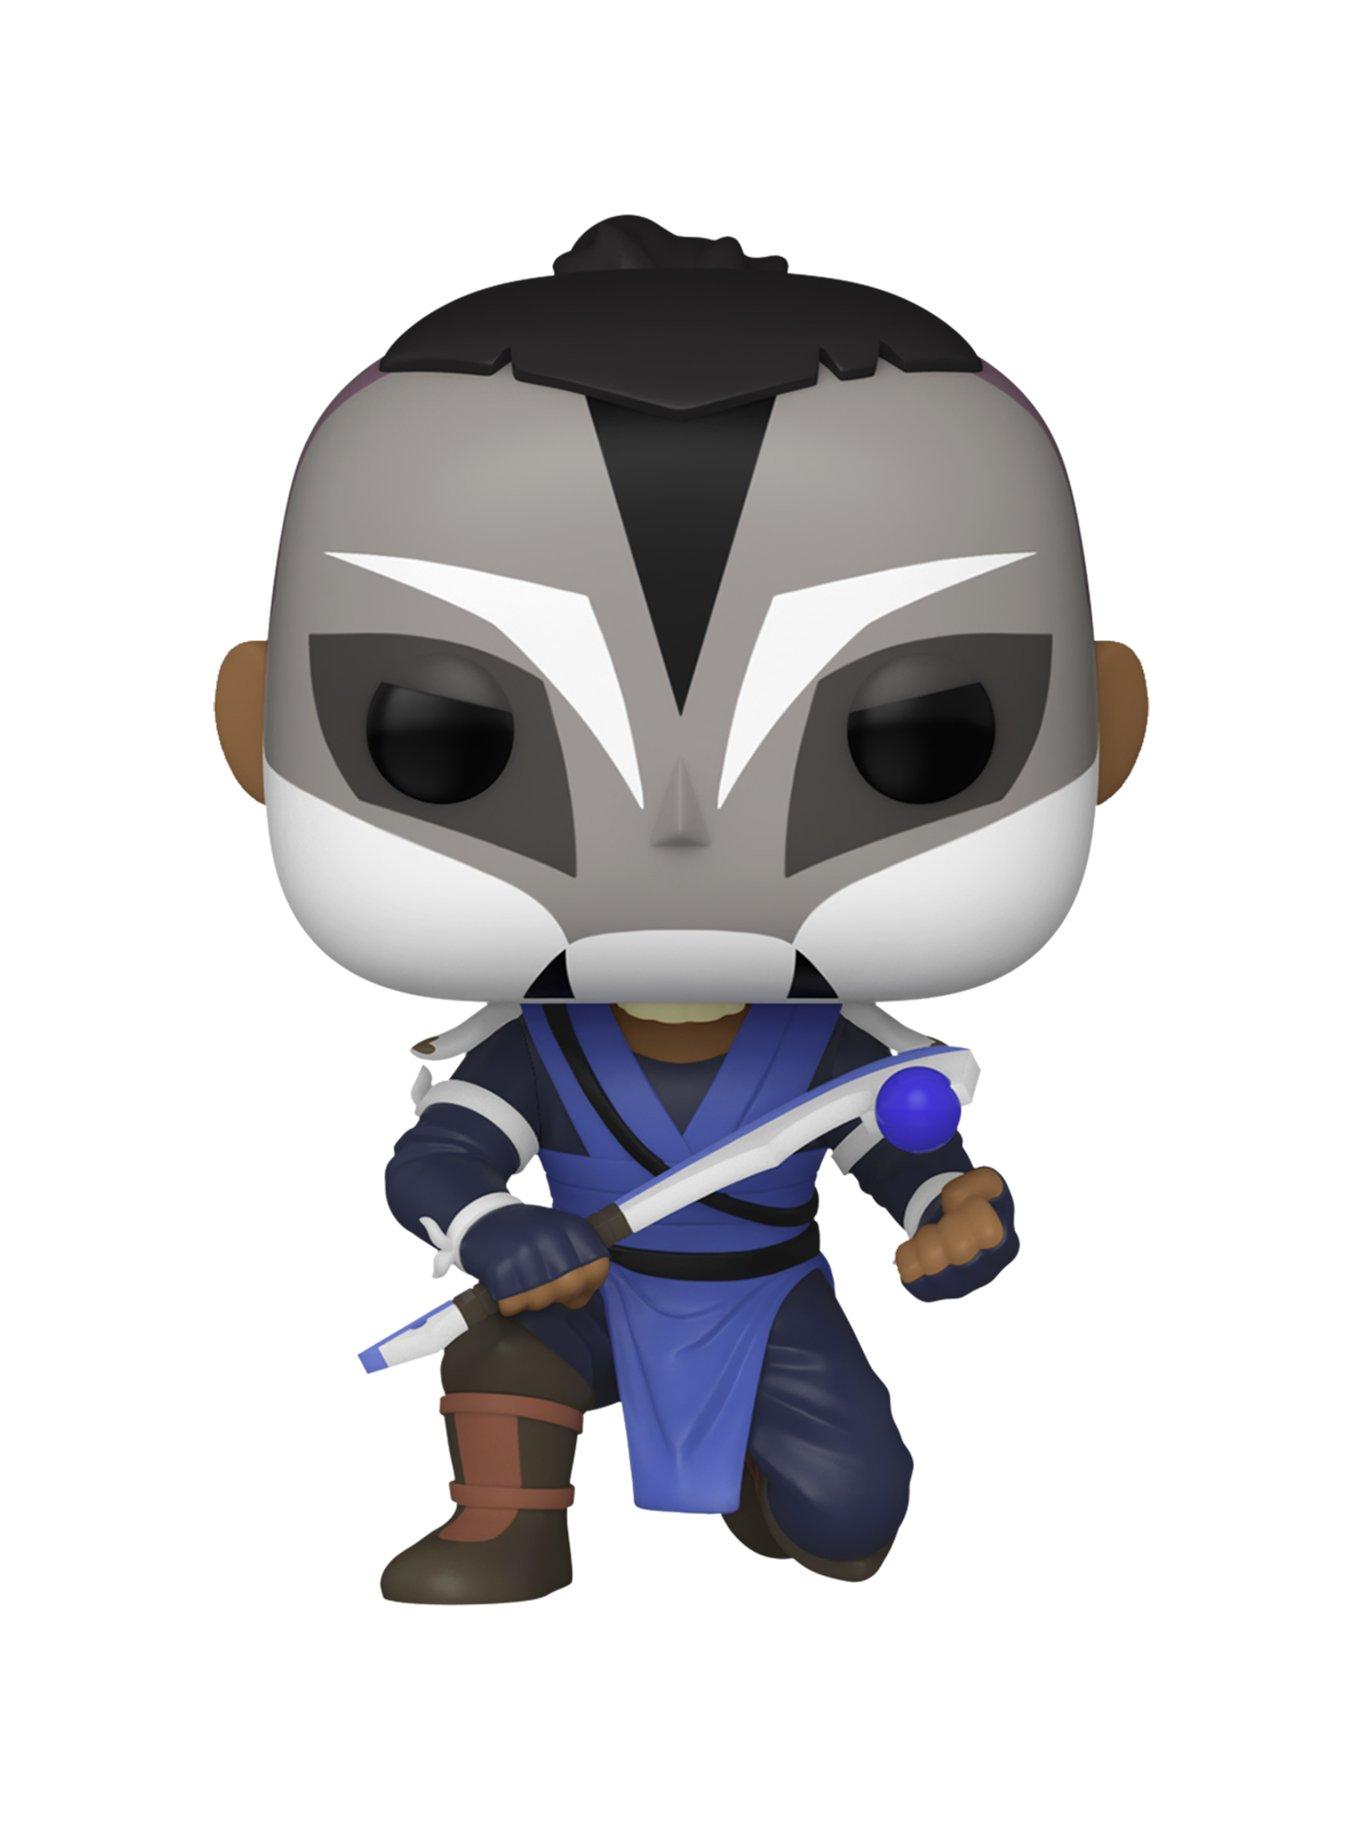 Funko Pop! Animation: Avatar: The Last Airbender Bundle (with   Exclusive)